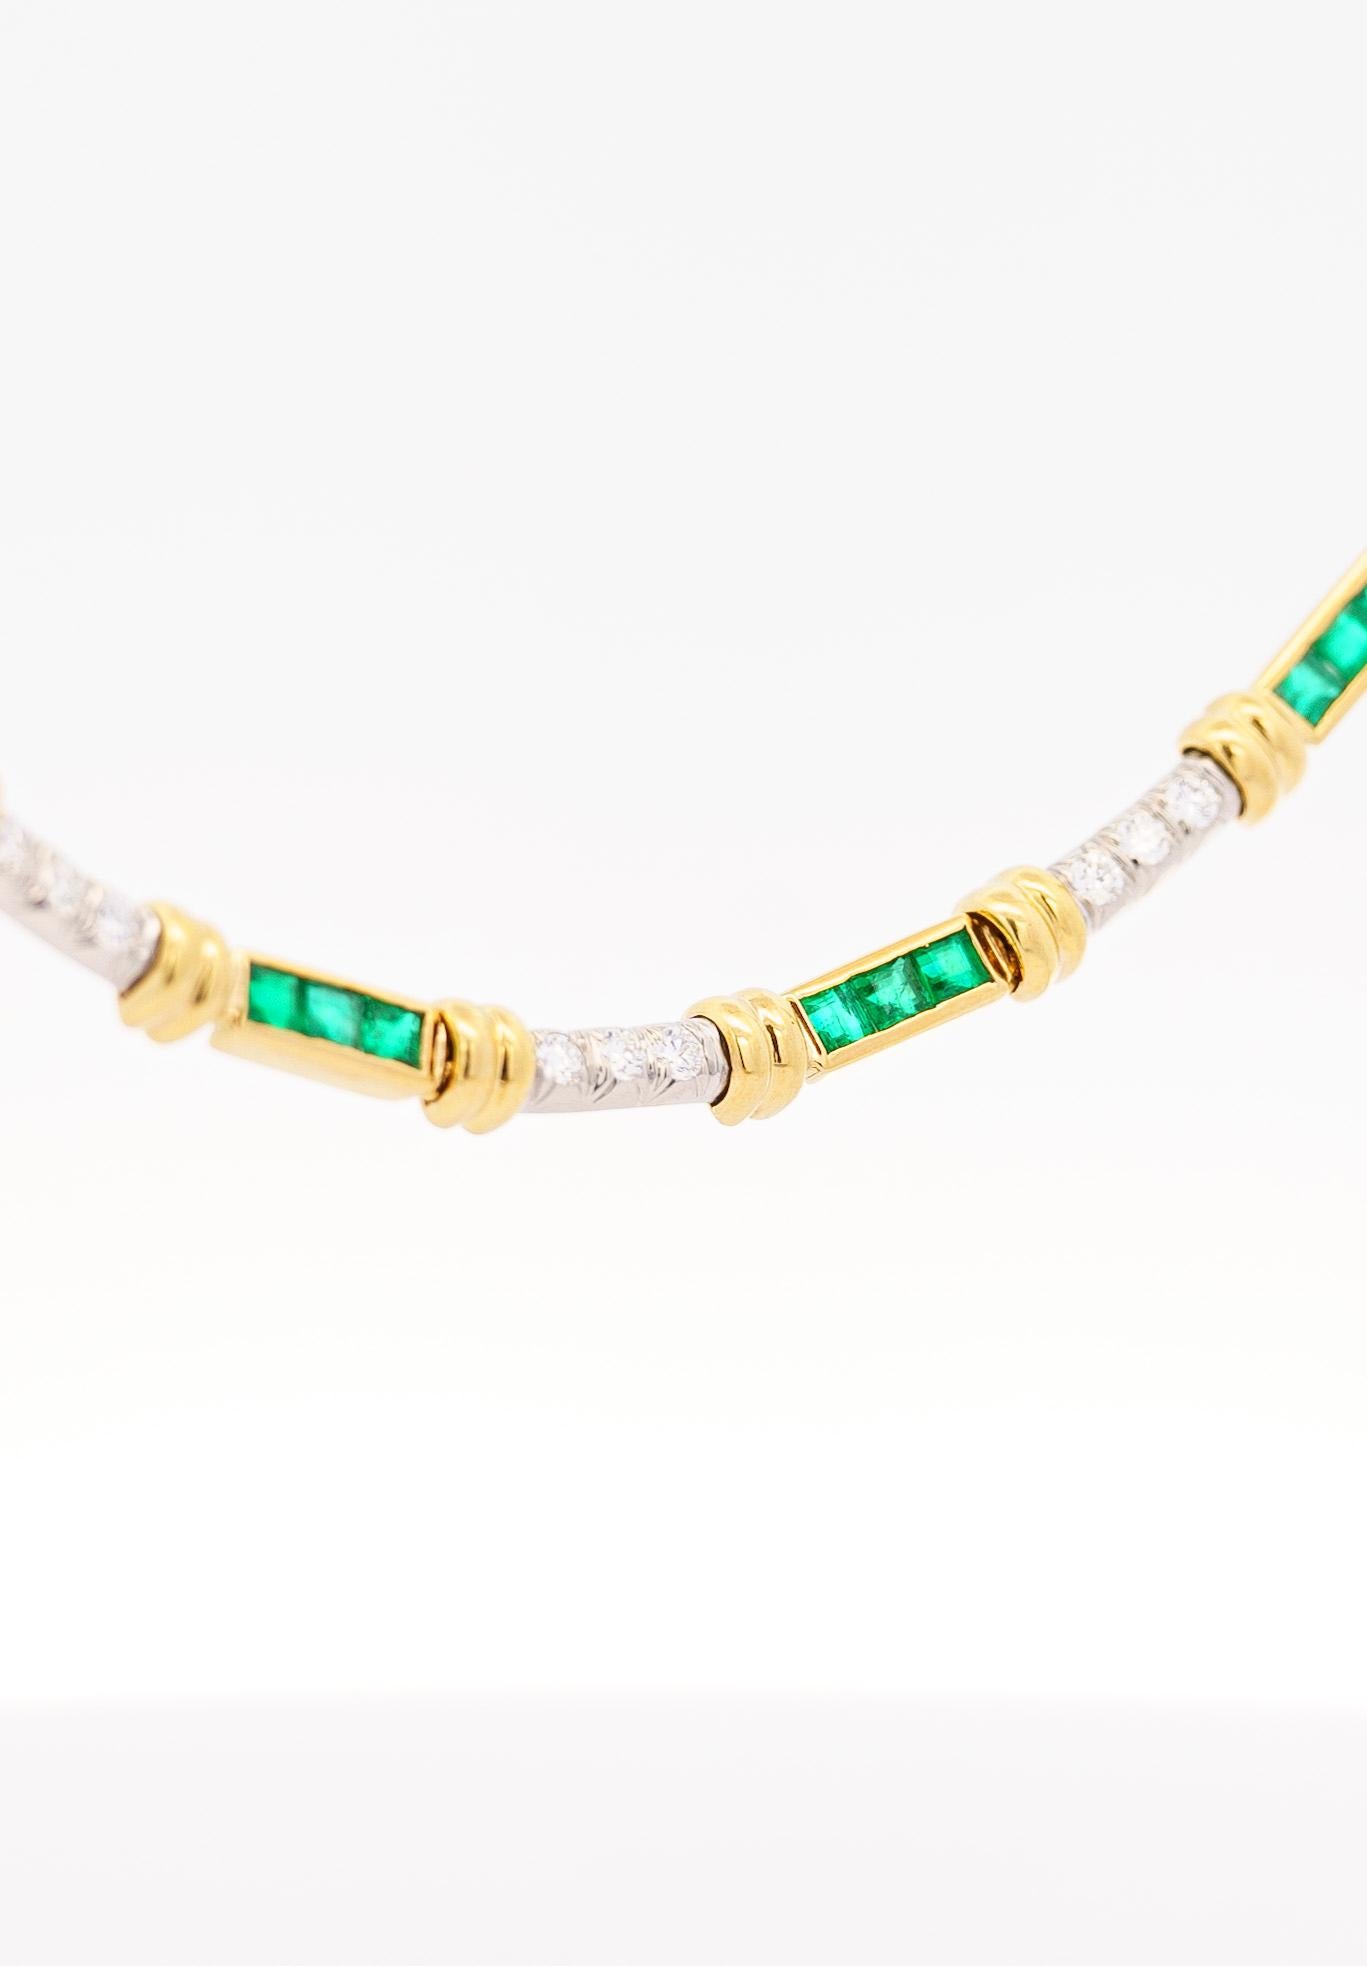 Natural emerald and diamond choker necklace in 18k gold. Fixed with a textured polished finish, channel tension setting, and box closure with double safety clasps. A natural gem and solid gold piece with ideal weight on the neck and perfect